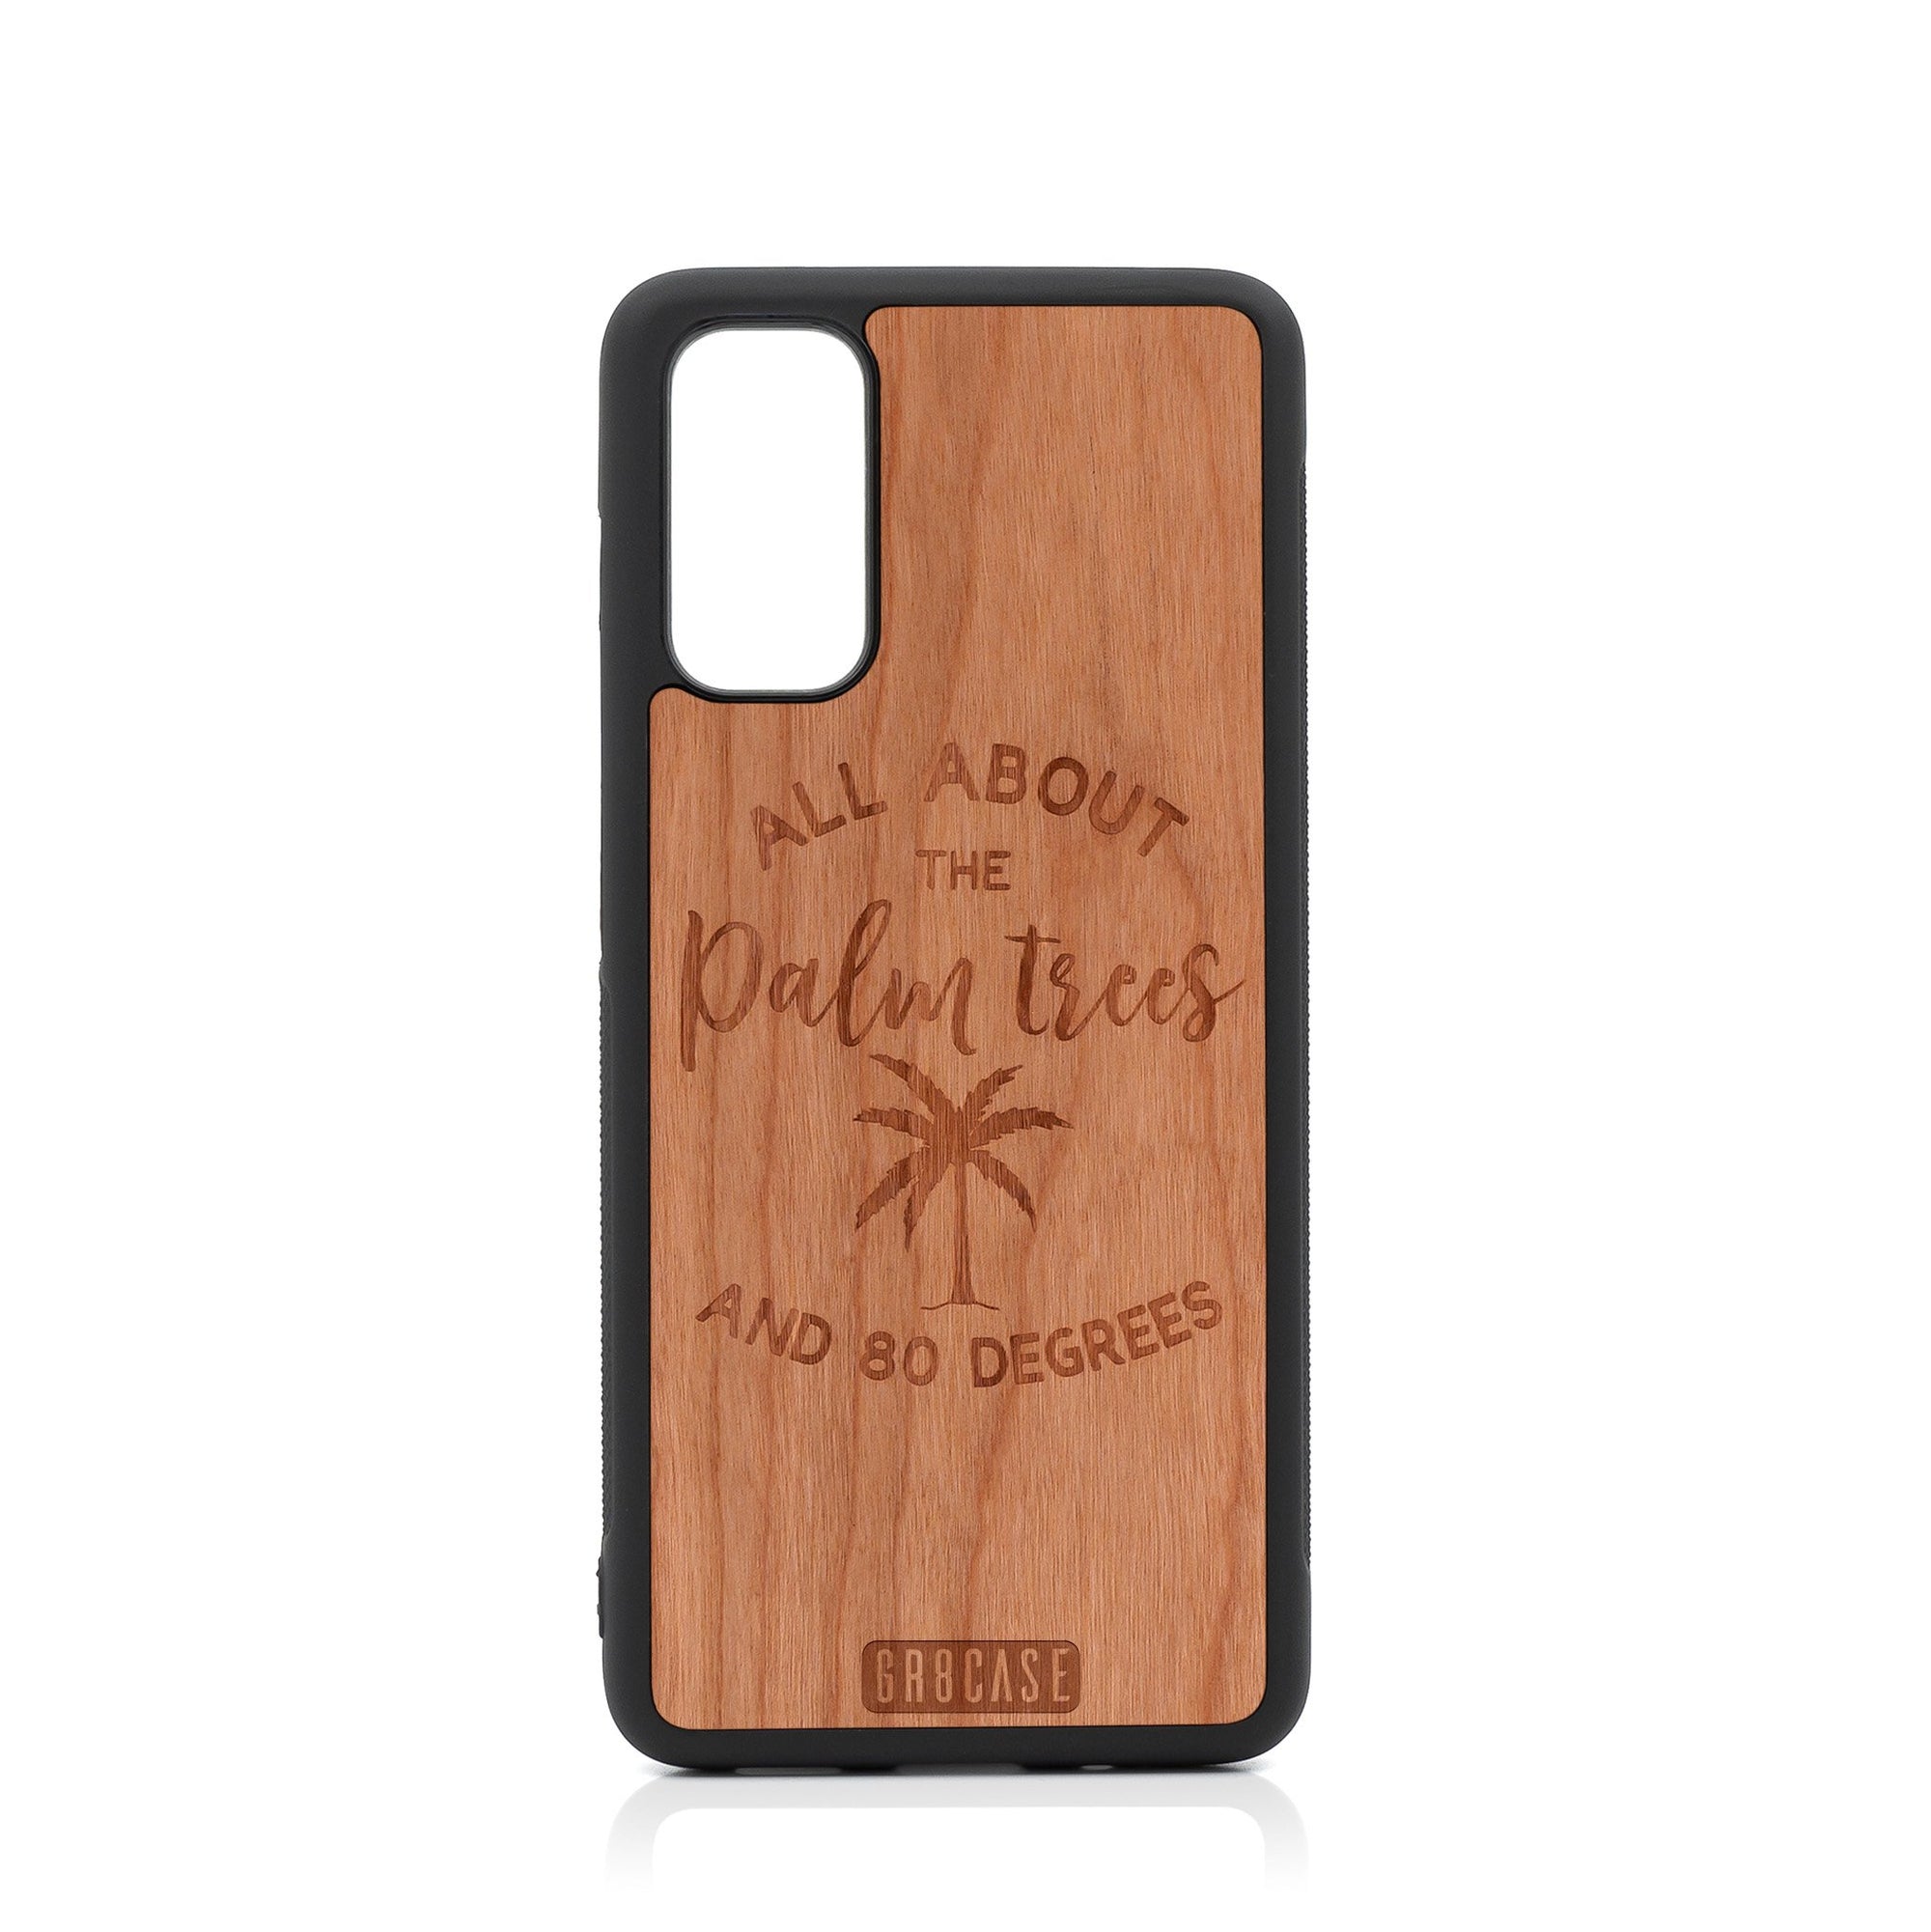 All About The Palm Trees and 80 Degrees Design Wood Case For Samsung Galaxy S20 FE 5G by GR8CASE